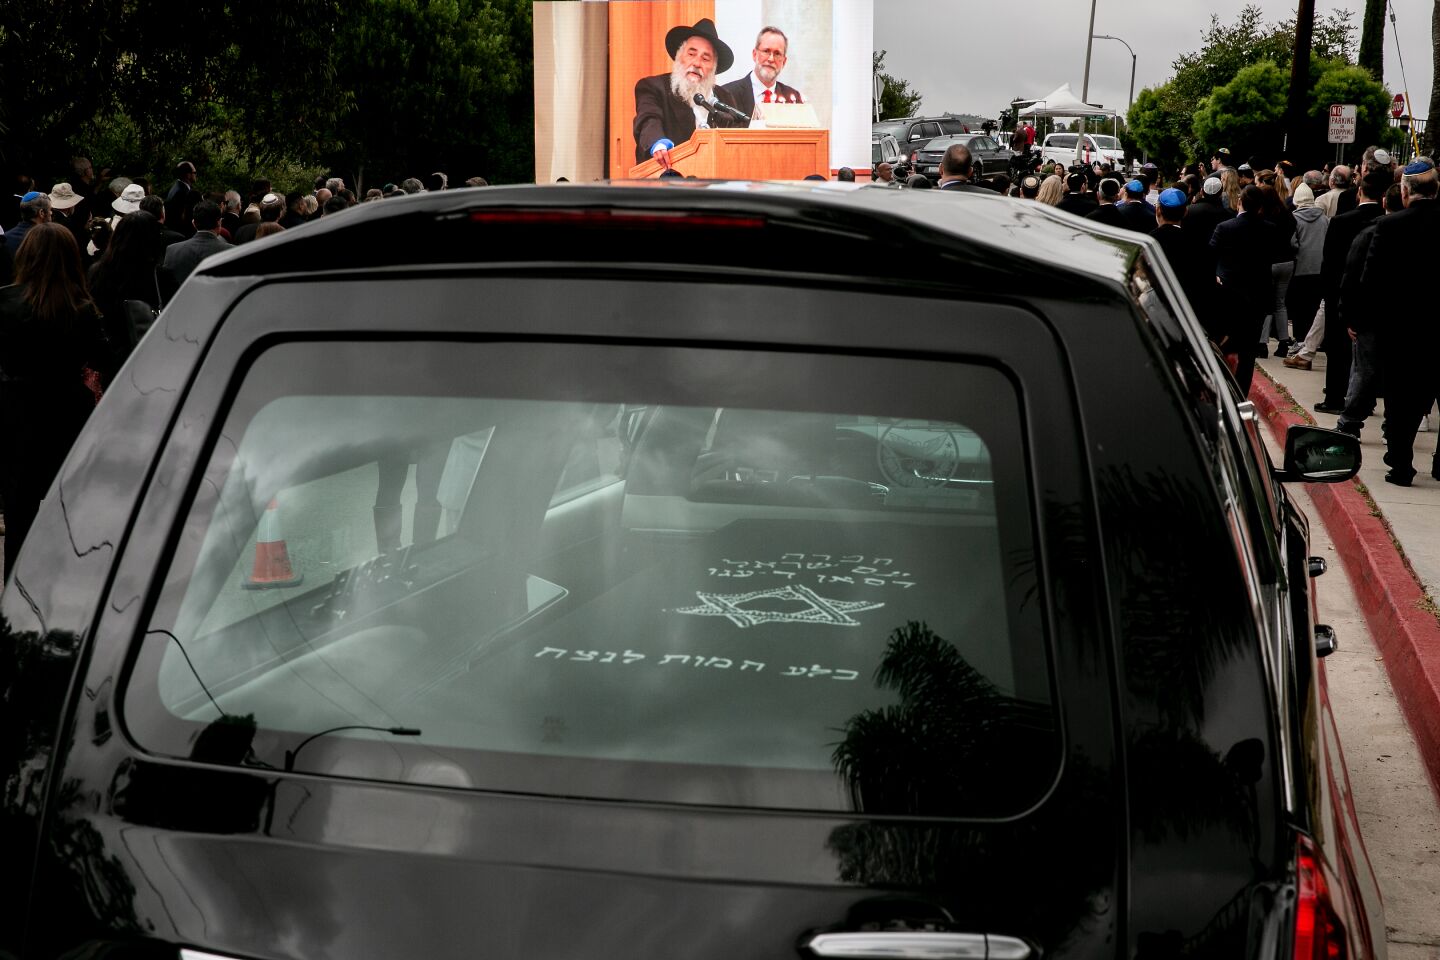 Rabbi Yisroel Goldstein is seen on a screen to an overflow crowd of mourners gather outside of Chabad of Poway for a memorial service for Lori Gilbert Kaye on April 29, 2019 in Poway, California. Kaye was killed on Saturday when a gunman opened fire inside the synagogue.